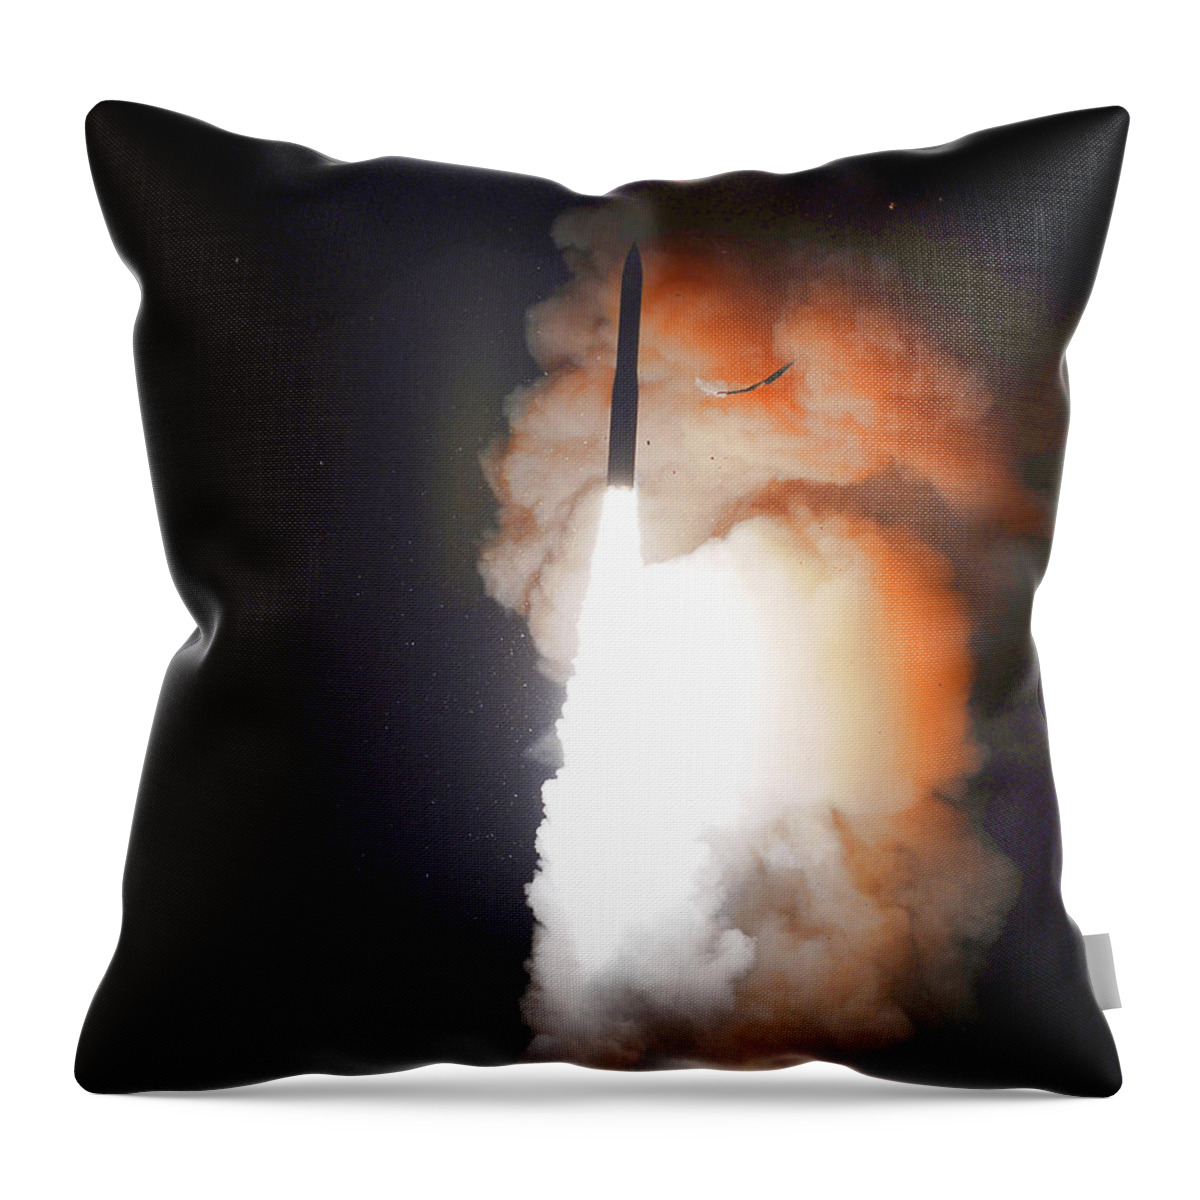 Missile Throw Pillow featuring the photograph Minuteman IIi Missile Test by Science Source